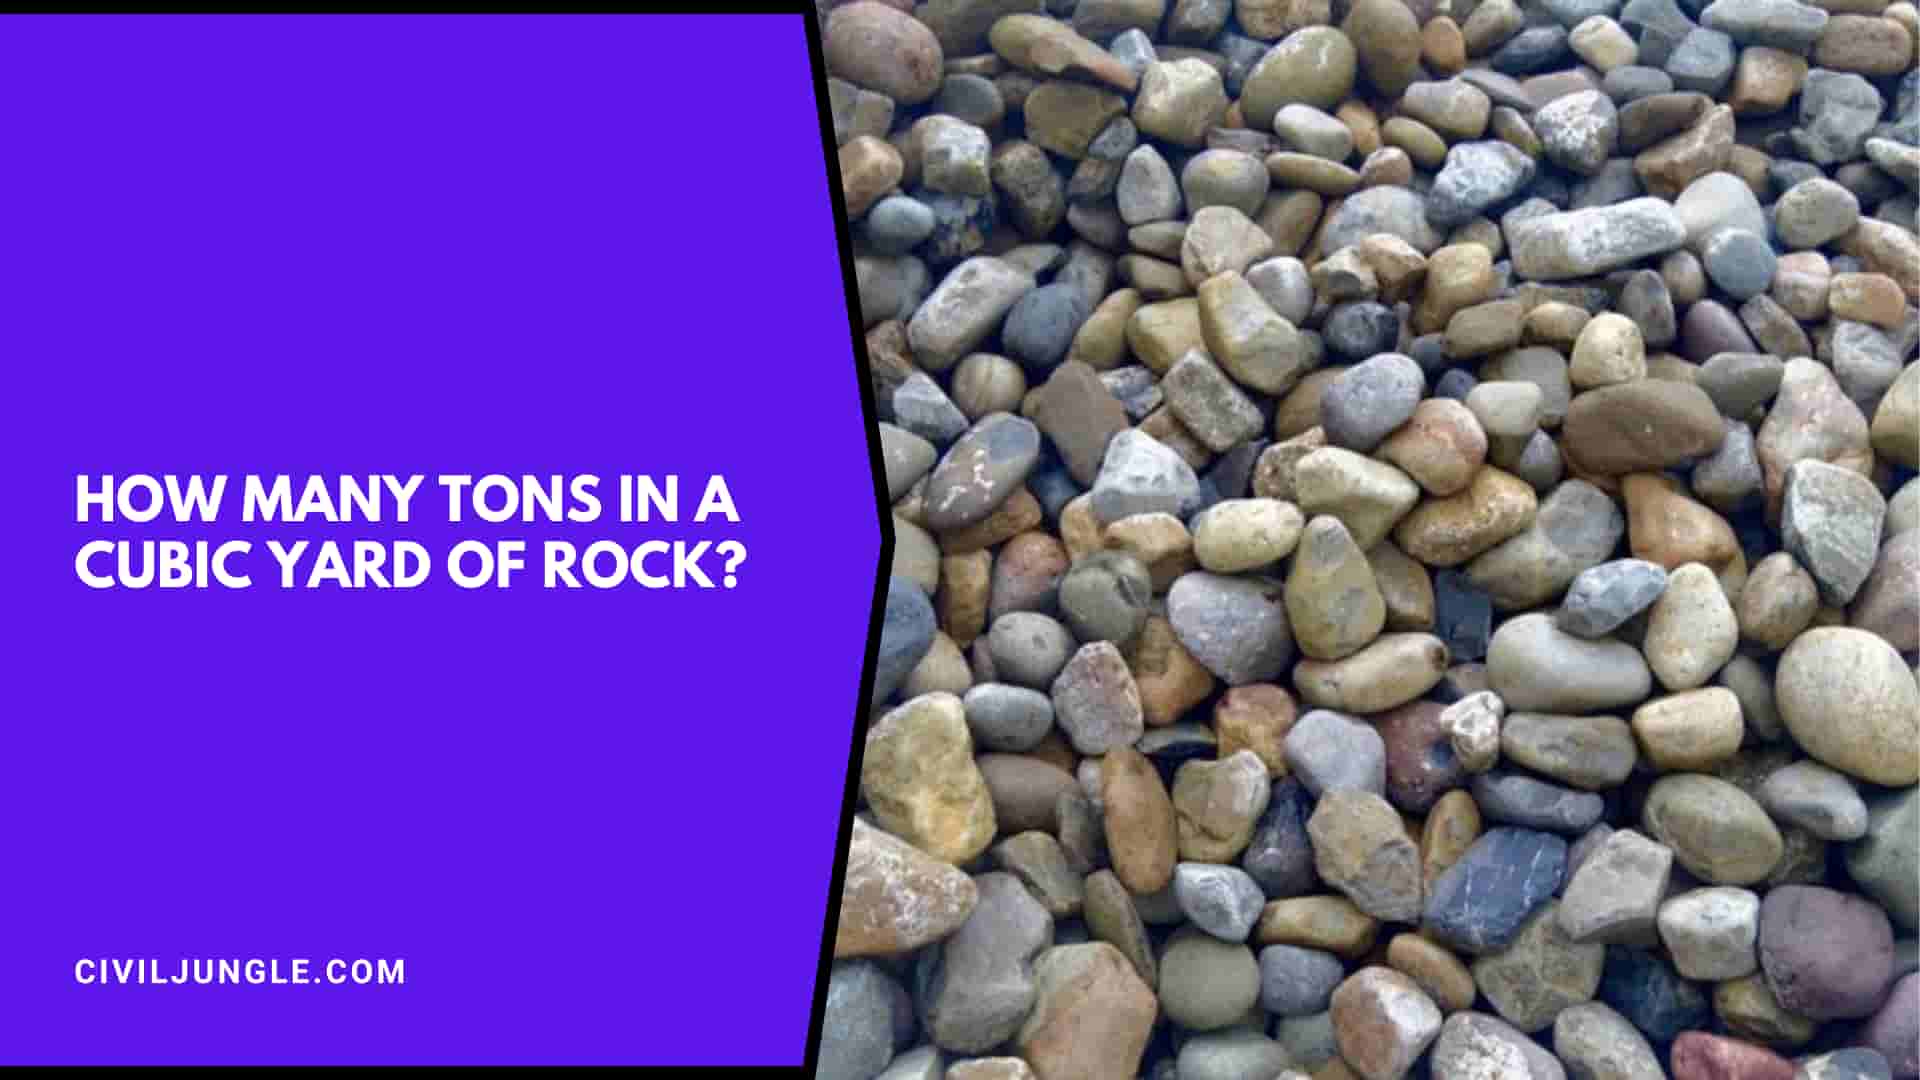 How Many Tons in a Cubic Yard of Rock?